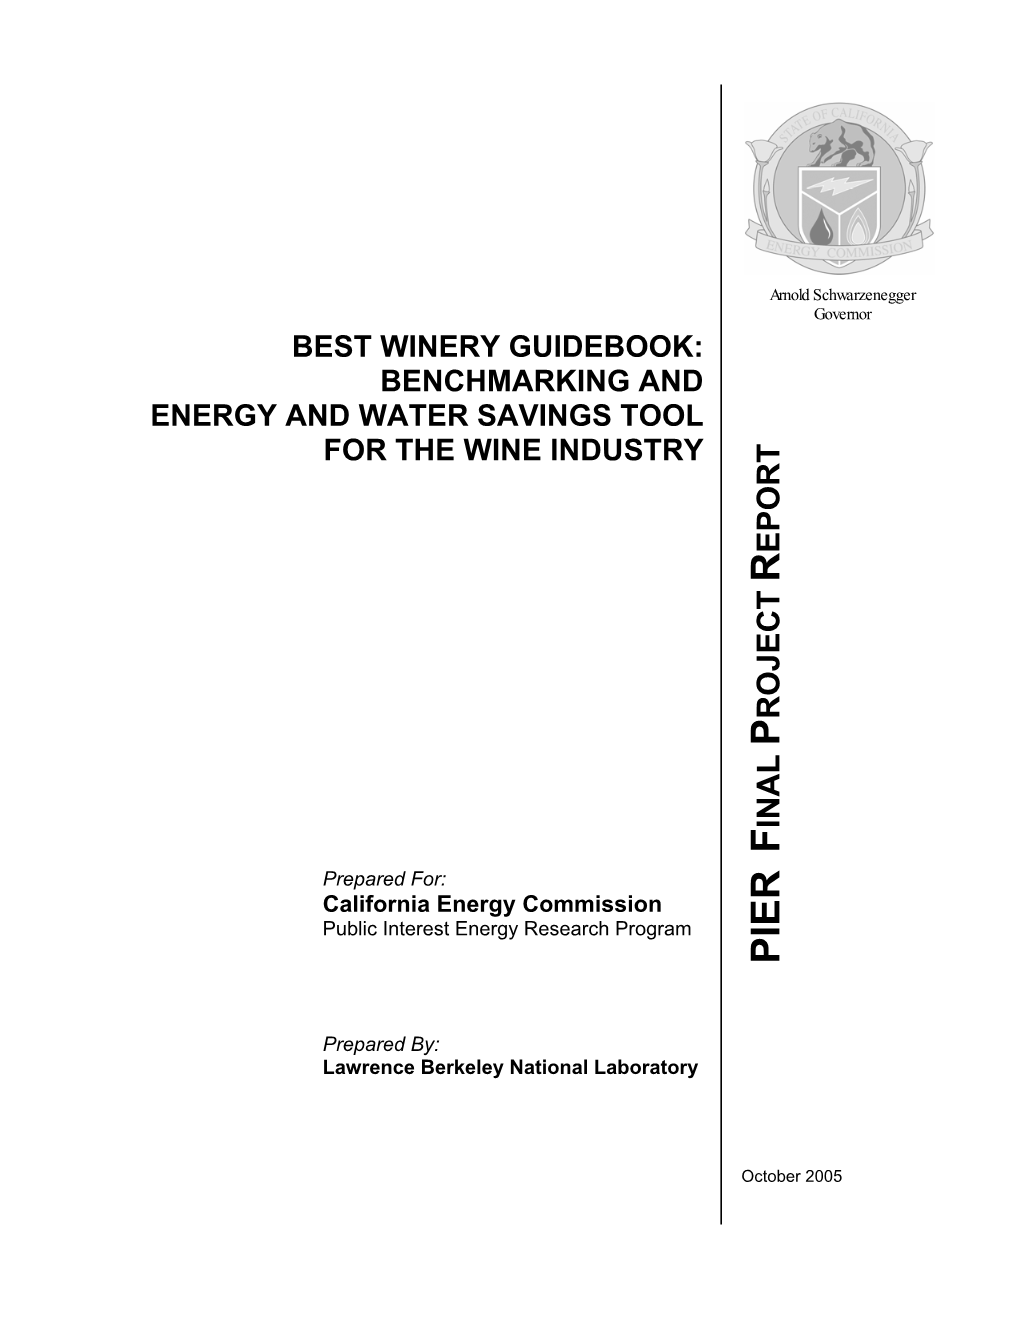 Best Winery Guidebook: Benchmarking and Energy and Water Savings Tool for the Wine Industry